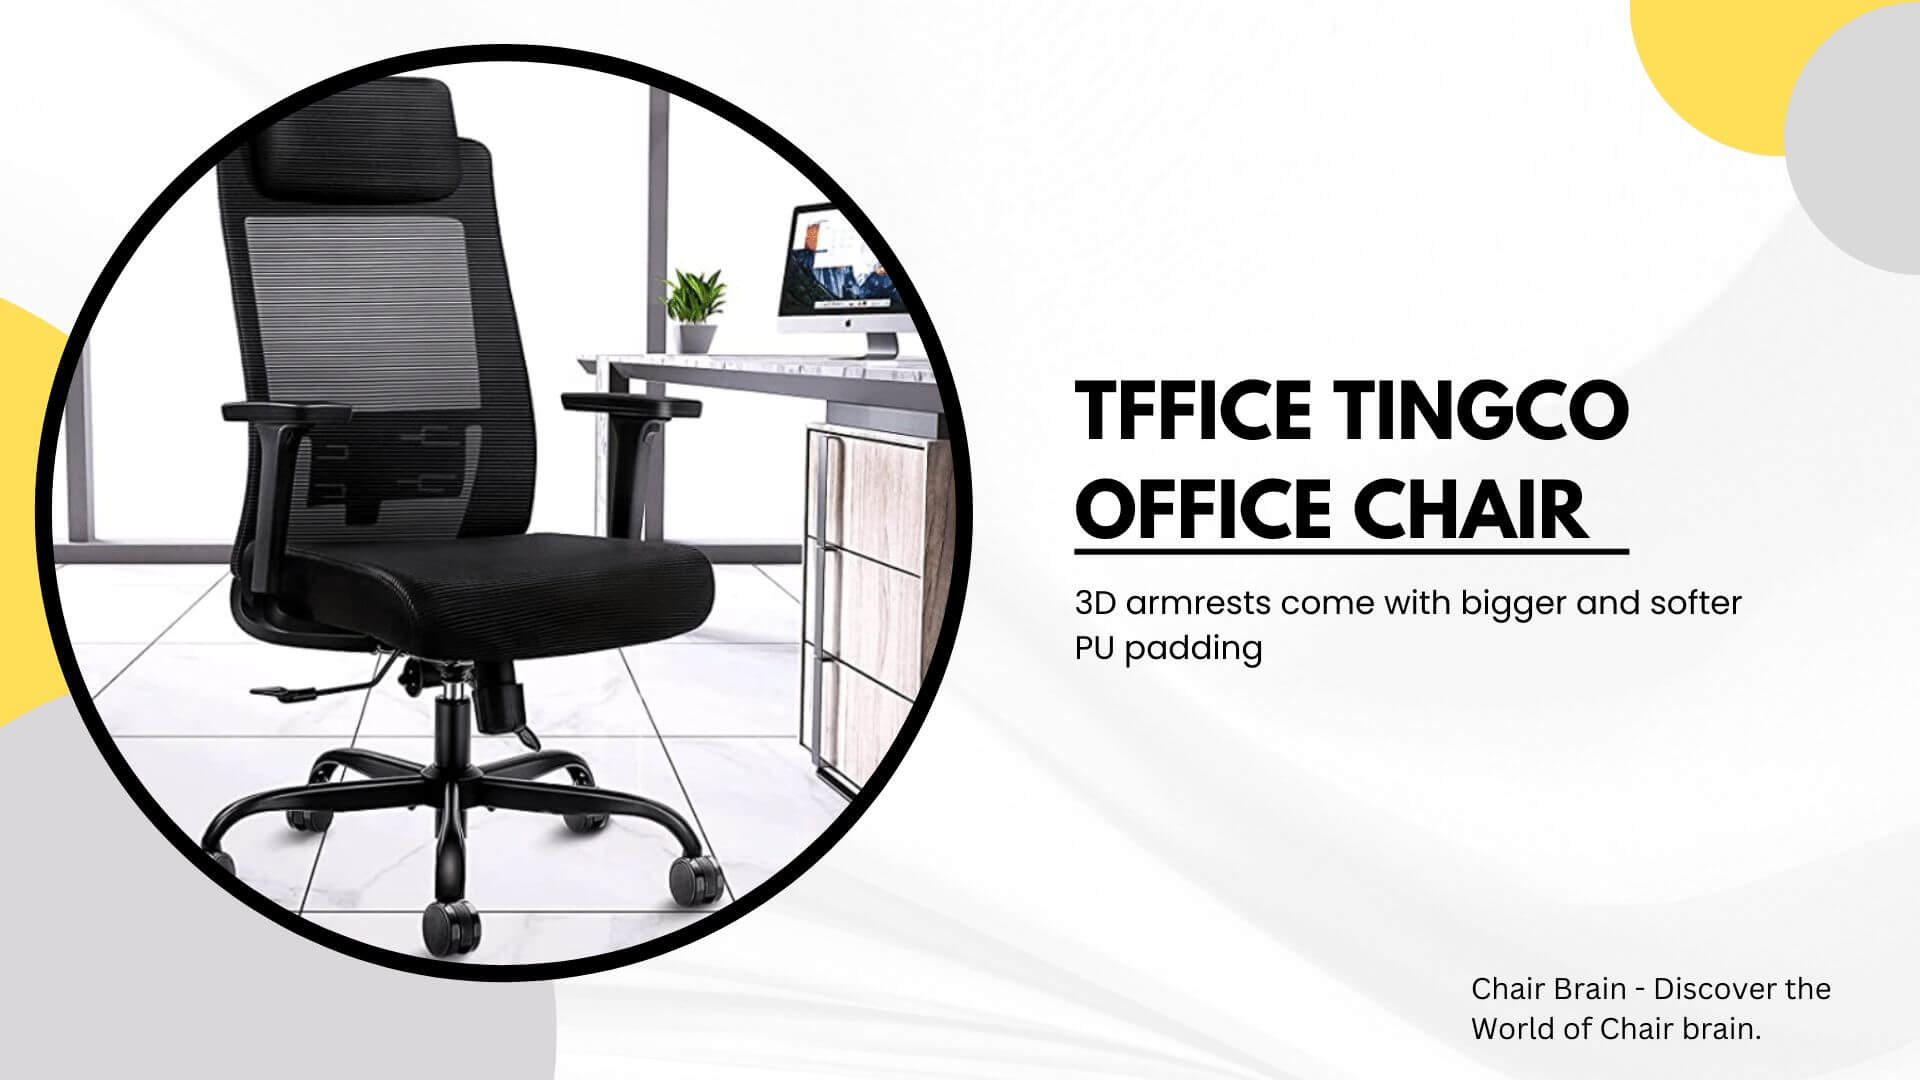 TfficeTingco Office Chair